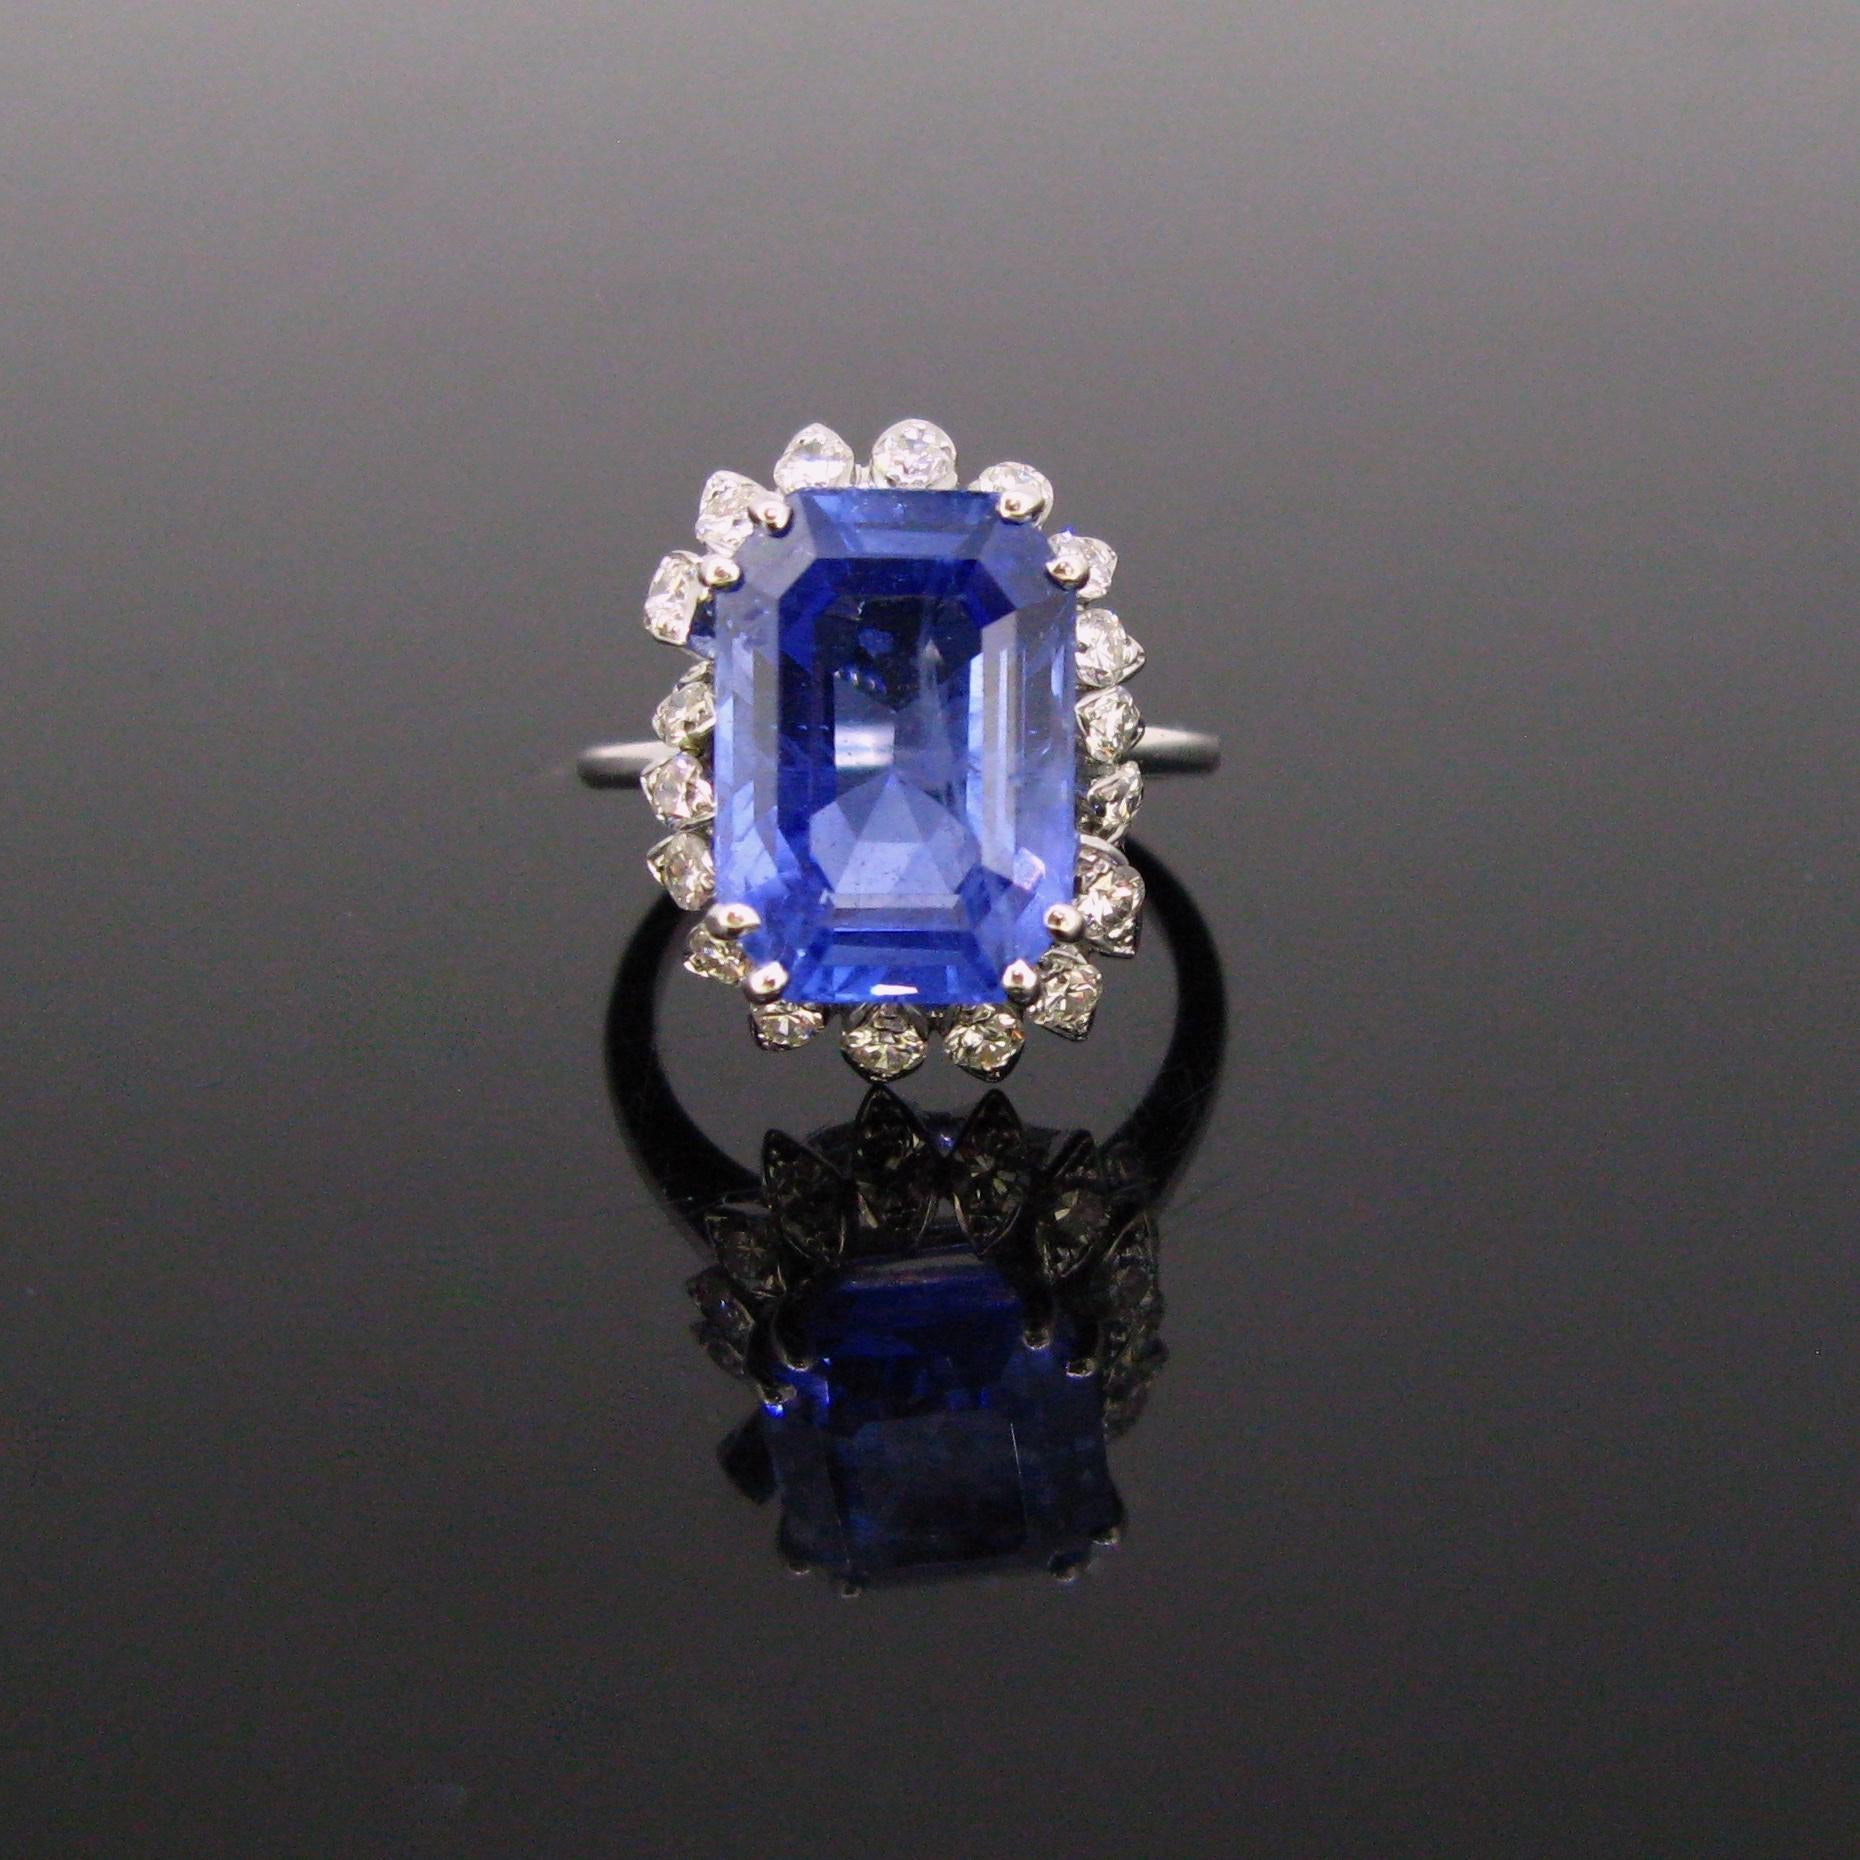 10.50 Carat Ceylon Natural Sapphire Diamonds Cluster Ring by Wald 4